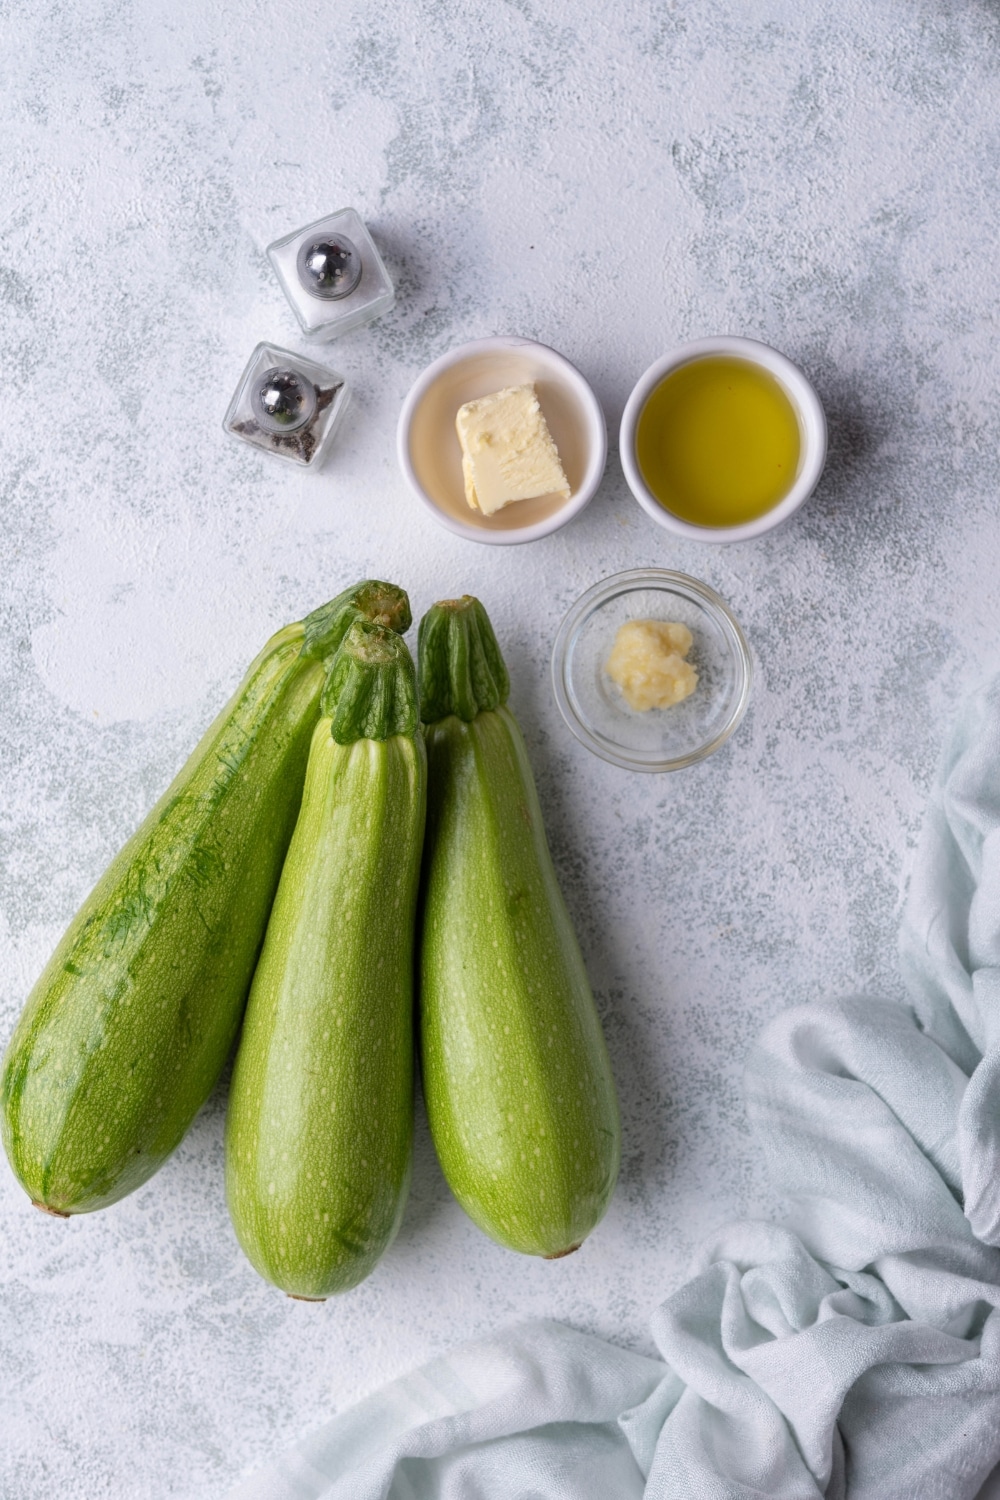 Three medium sized zucchini, salt and pepper shakers, two small ceramic ramekins of olive oil and butter, and a small glass bowl of garlic paste.